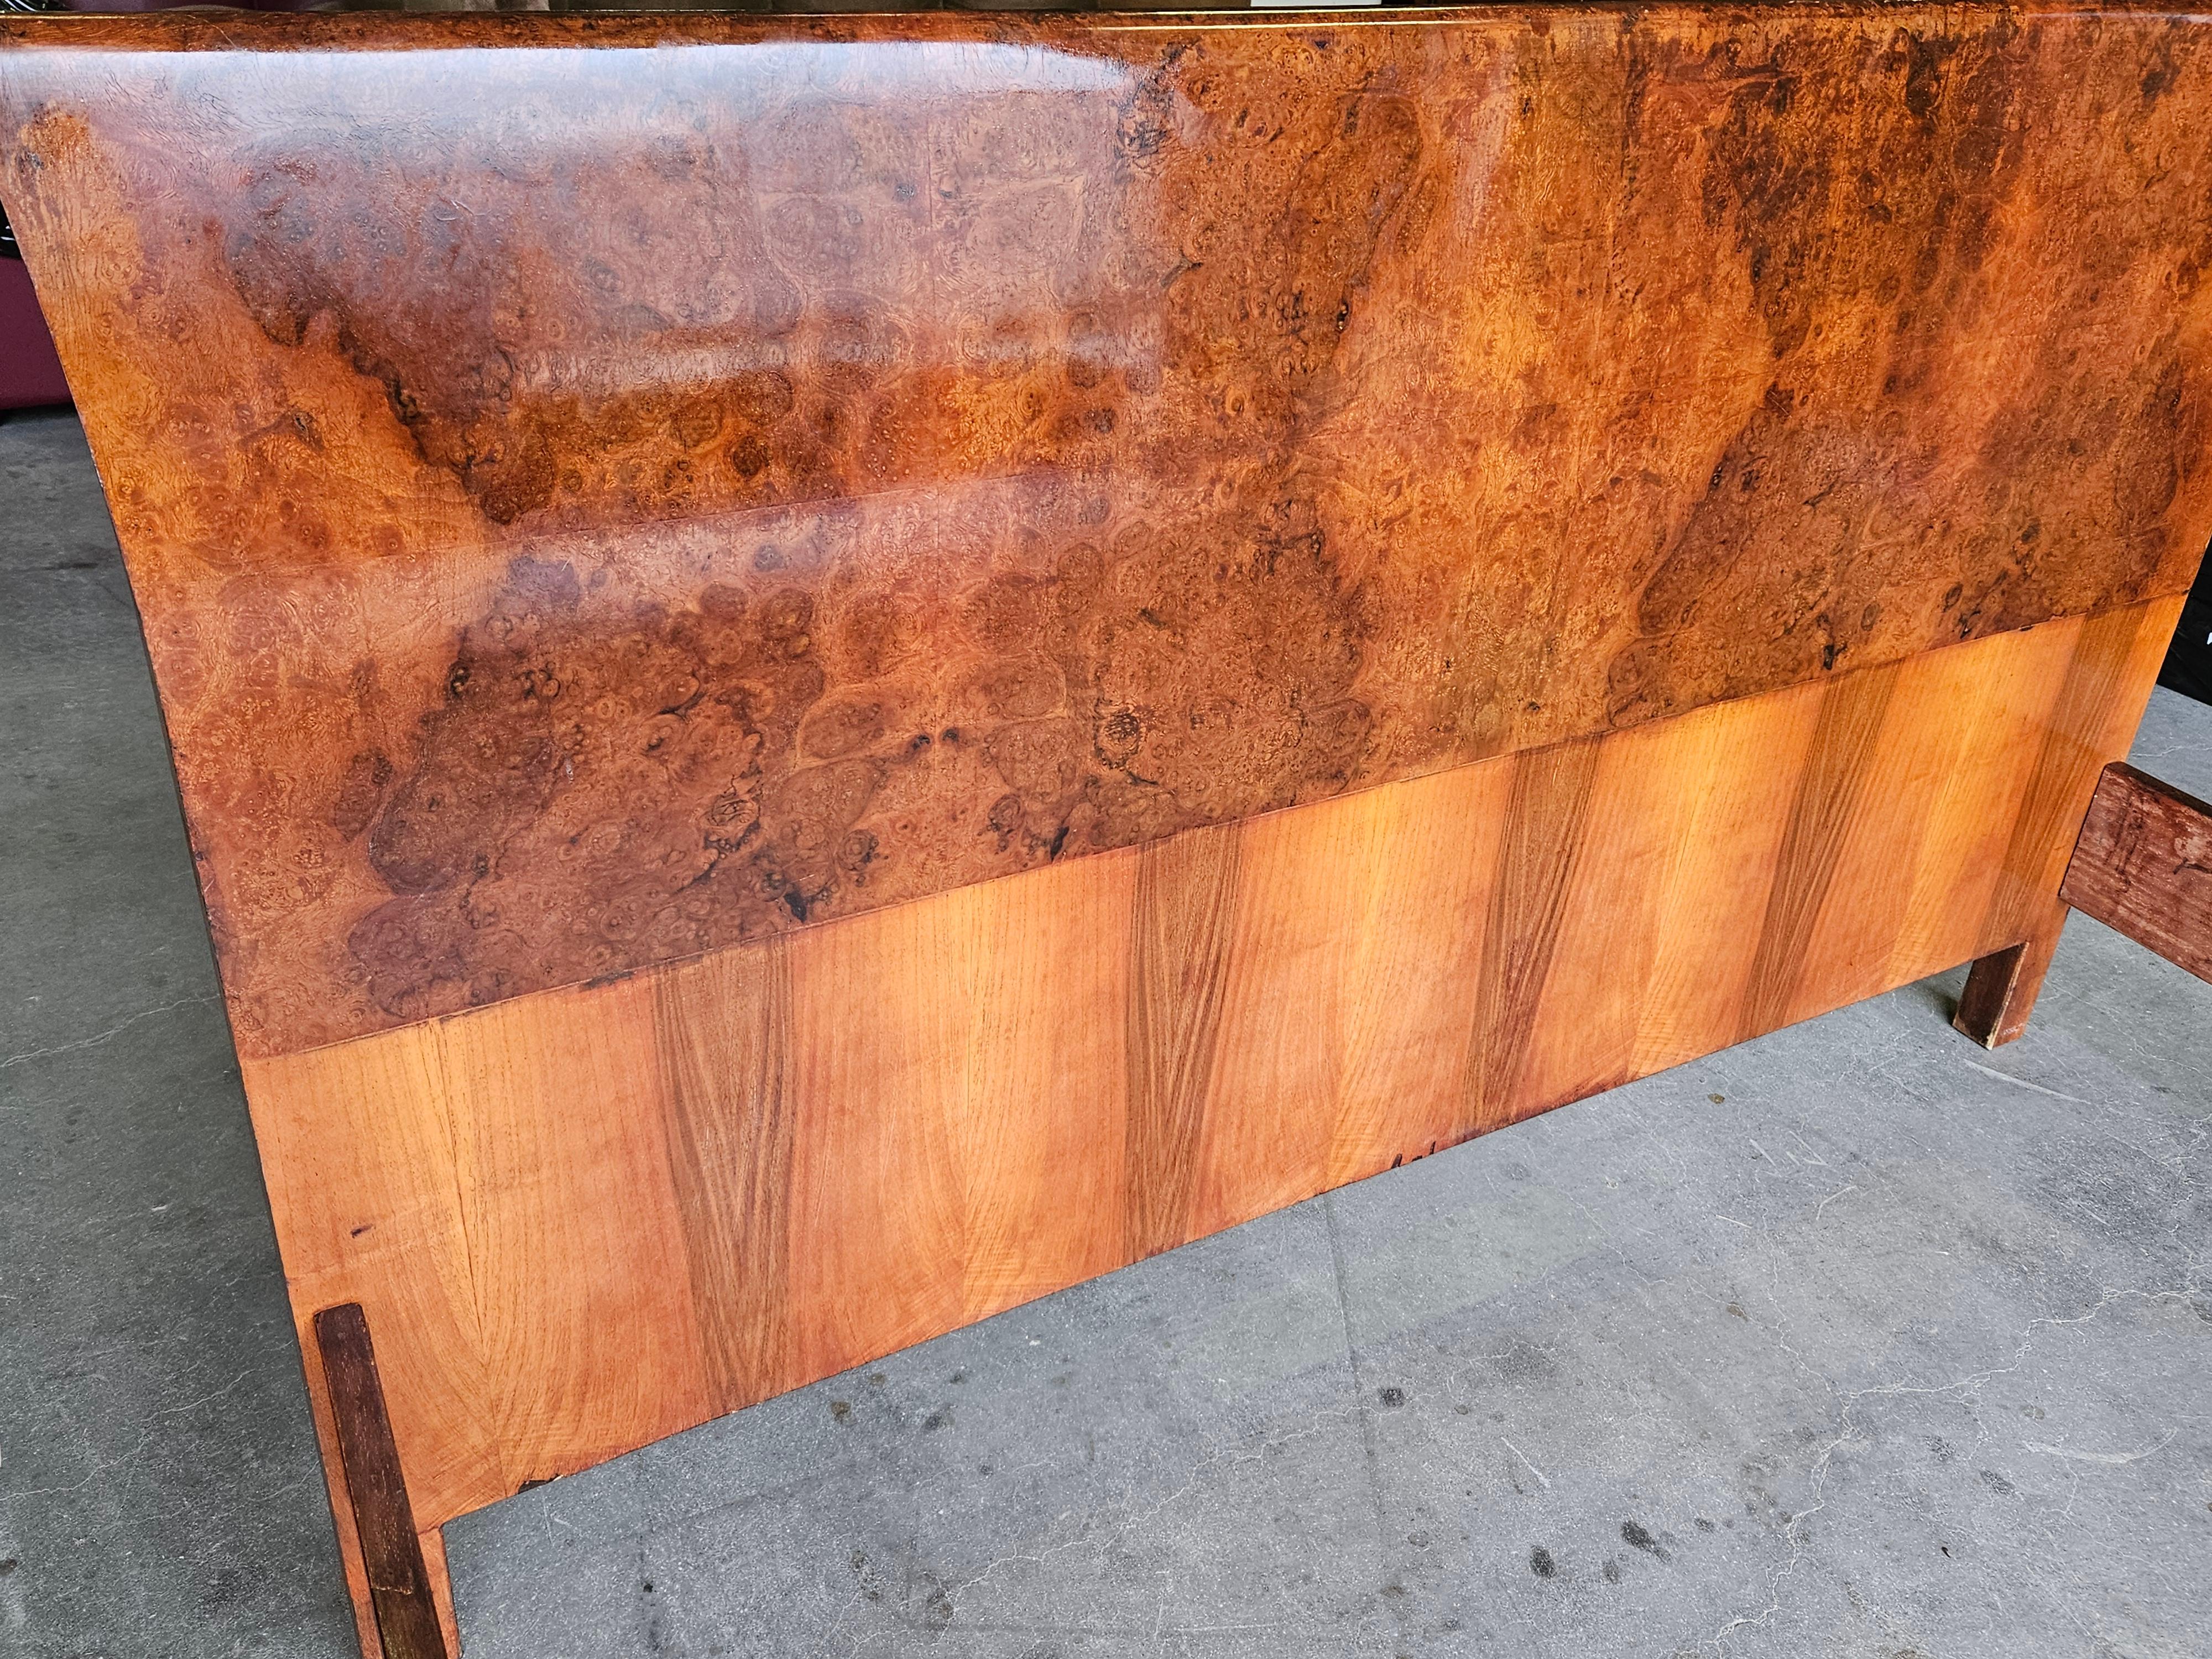 Double bed with walnut burl frame, suitable for modern or classic vintage settings.

Has normal signs of wear due to age and use as pictured.

Interior measurements 164x198cm.
Headboard height 104.5cm.
Footboard height 64cm.